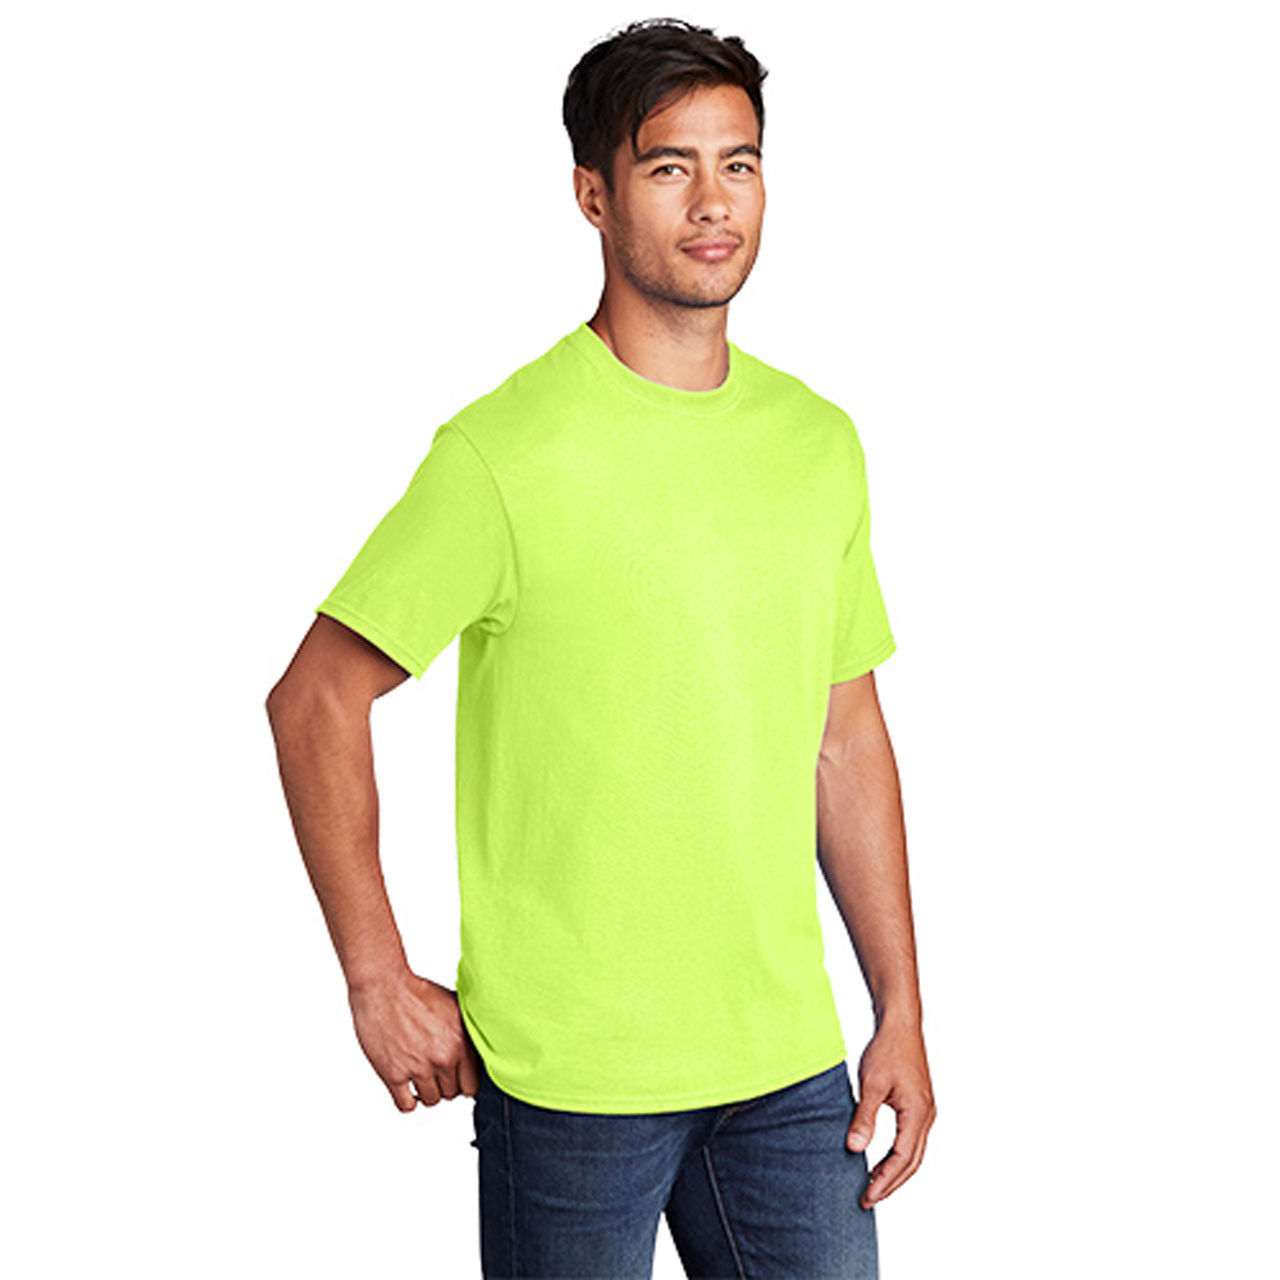 Is the neon color t-shirt made of cotton?